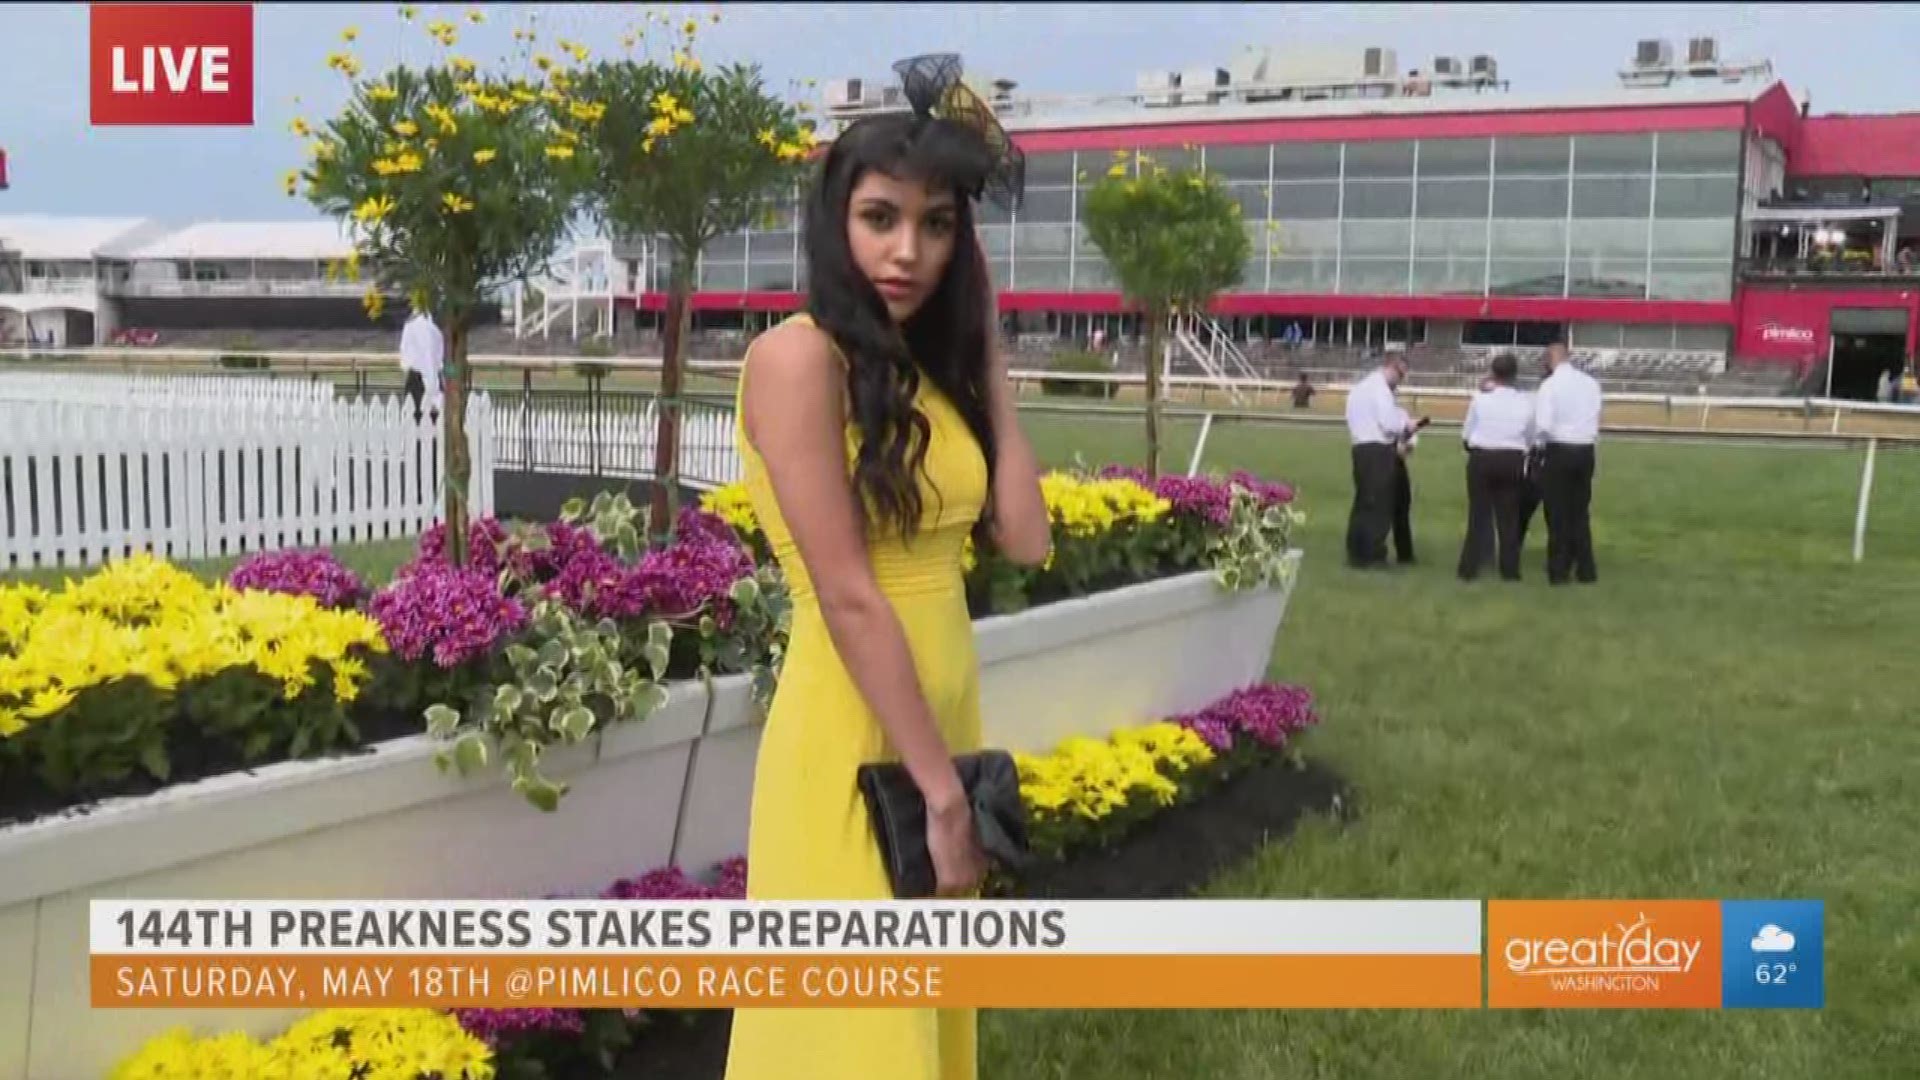 We check out the must-see fashions with Lana Rae from Hooves and Heels Fashion at the Pimlico Race Course ahead of the 144th Preakness Stakes.